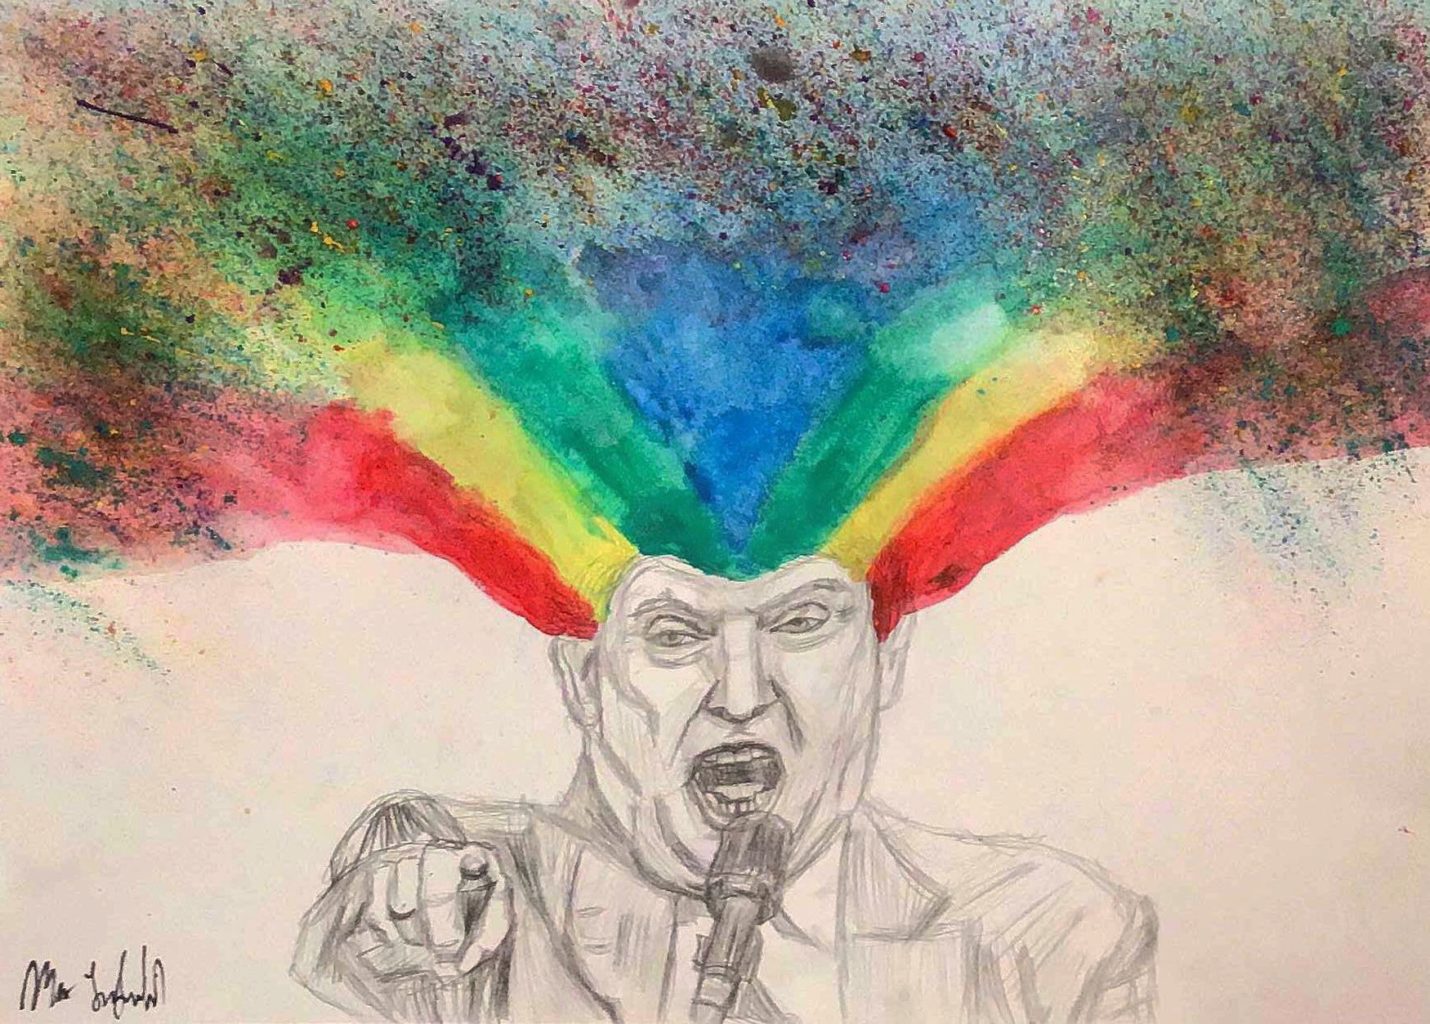 The Exploding Mind of the Mad King Painting- Donald trump painting and portrait drawing with an explosion